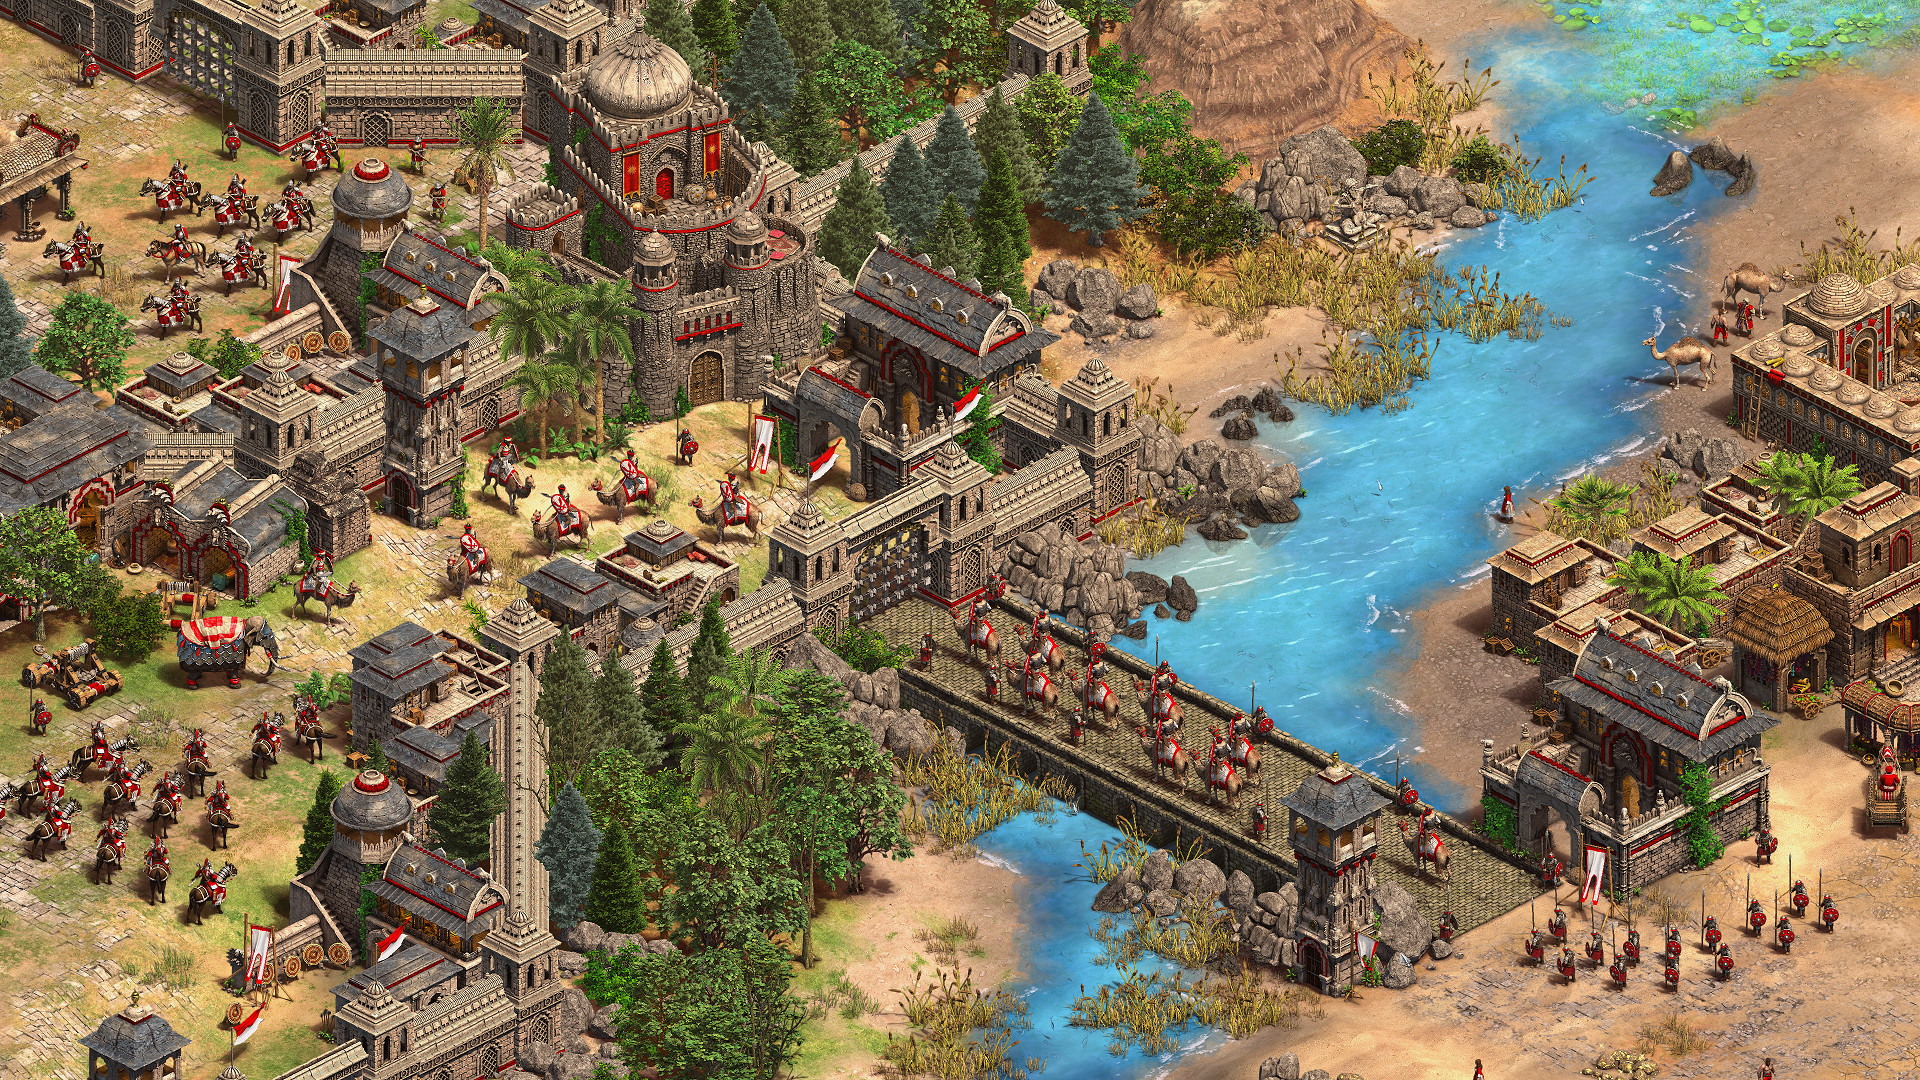 Age of Empires II: Definitive Edition - Dynasties of India - screenshot 5